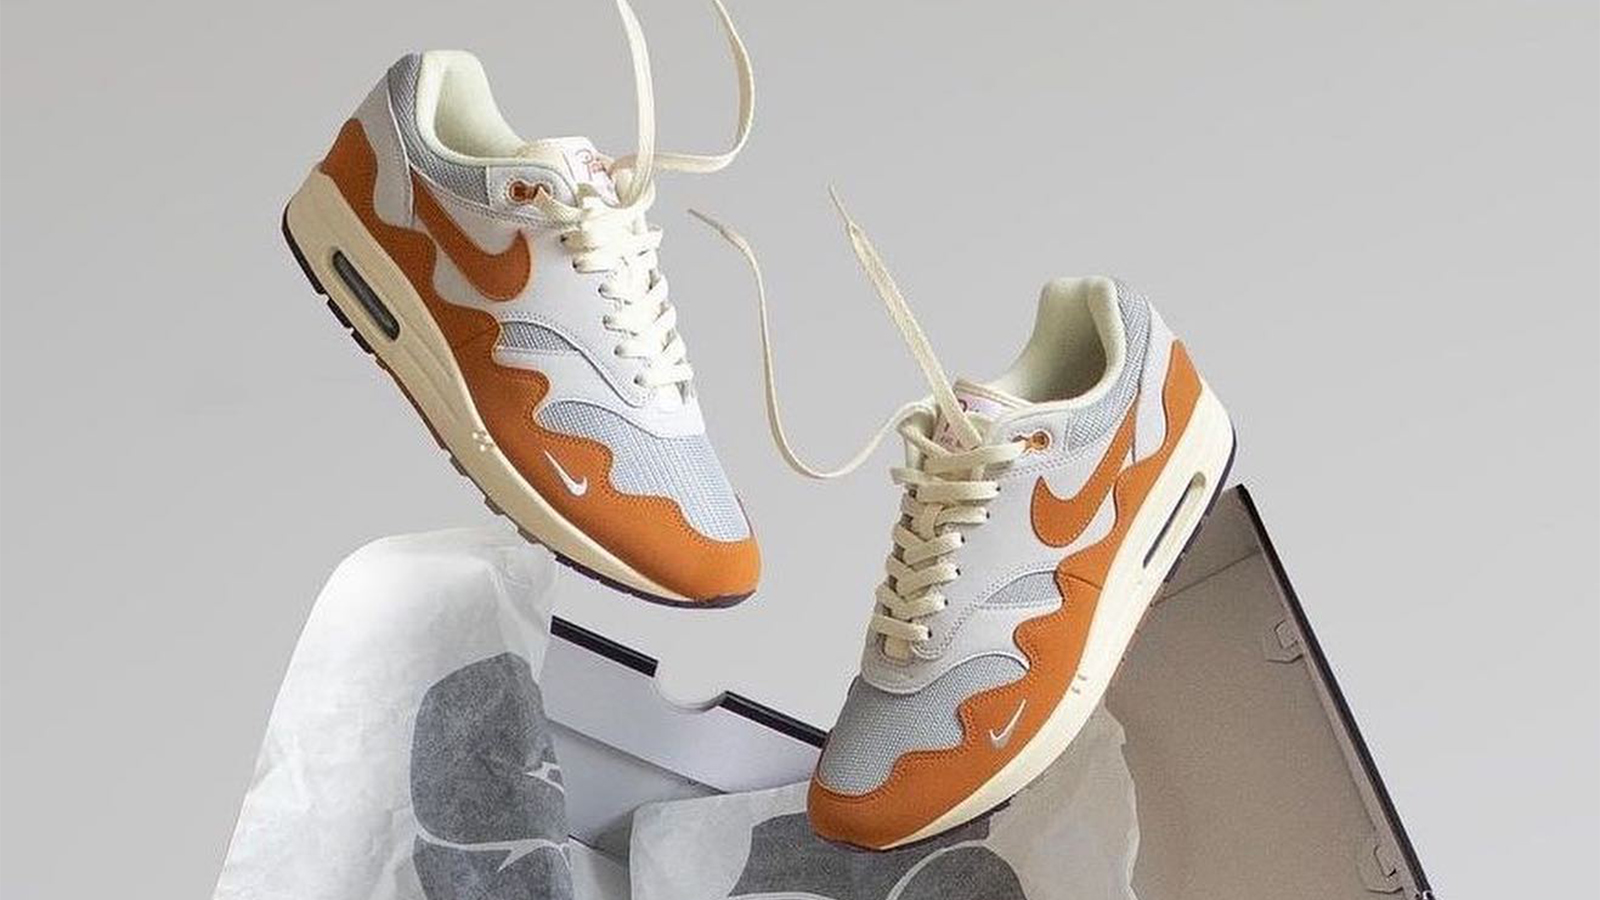 Air Max Day 2022: 5 Sneakers Your Collection Needs